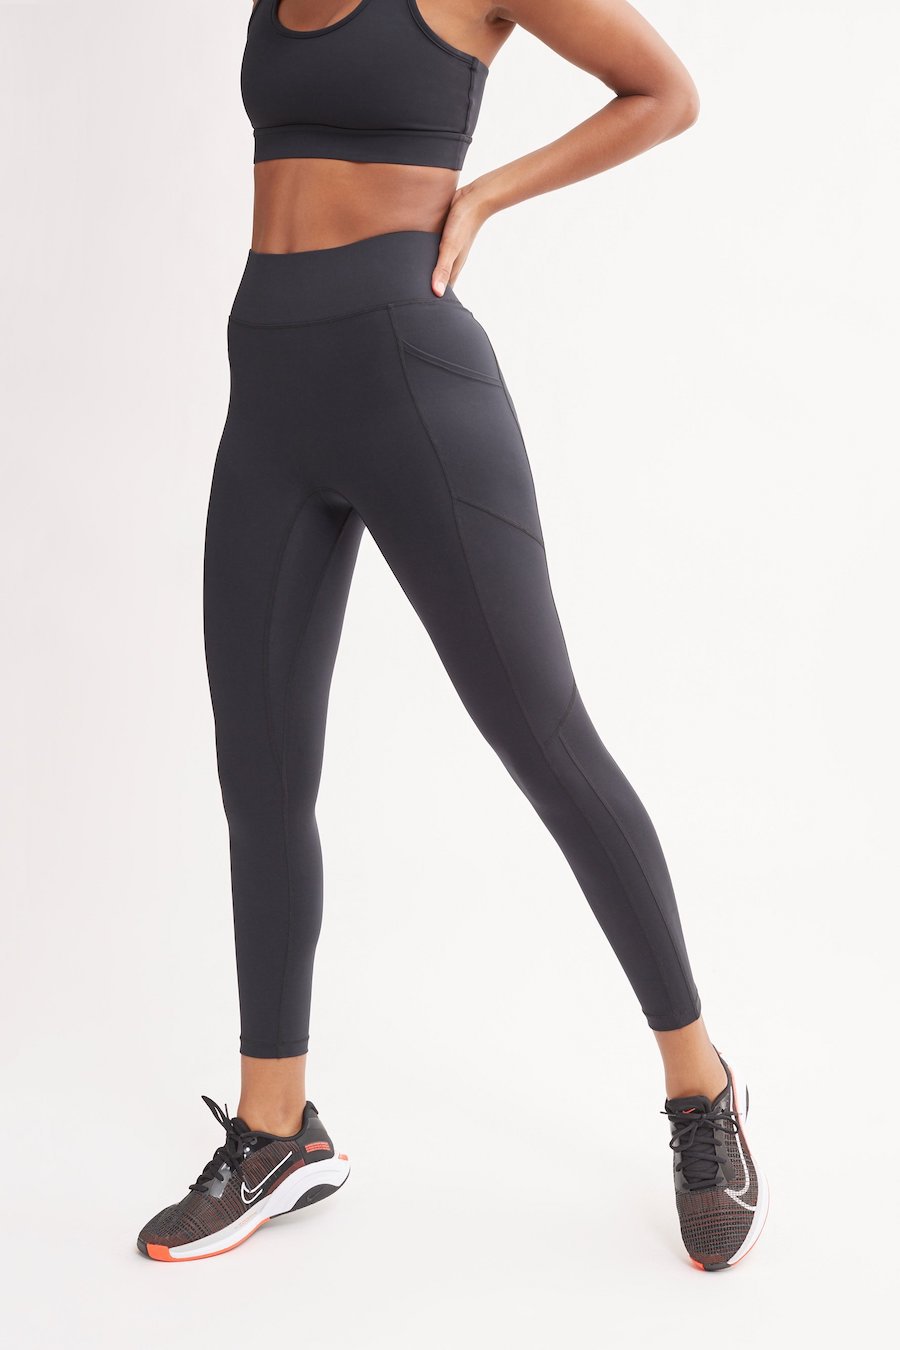 Bandier All Access High Waisted Center Stage Legging With Pocket - Alternatives to Gymshark